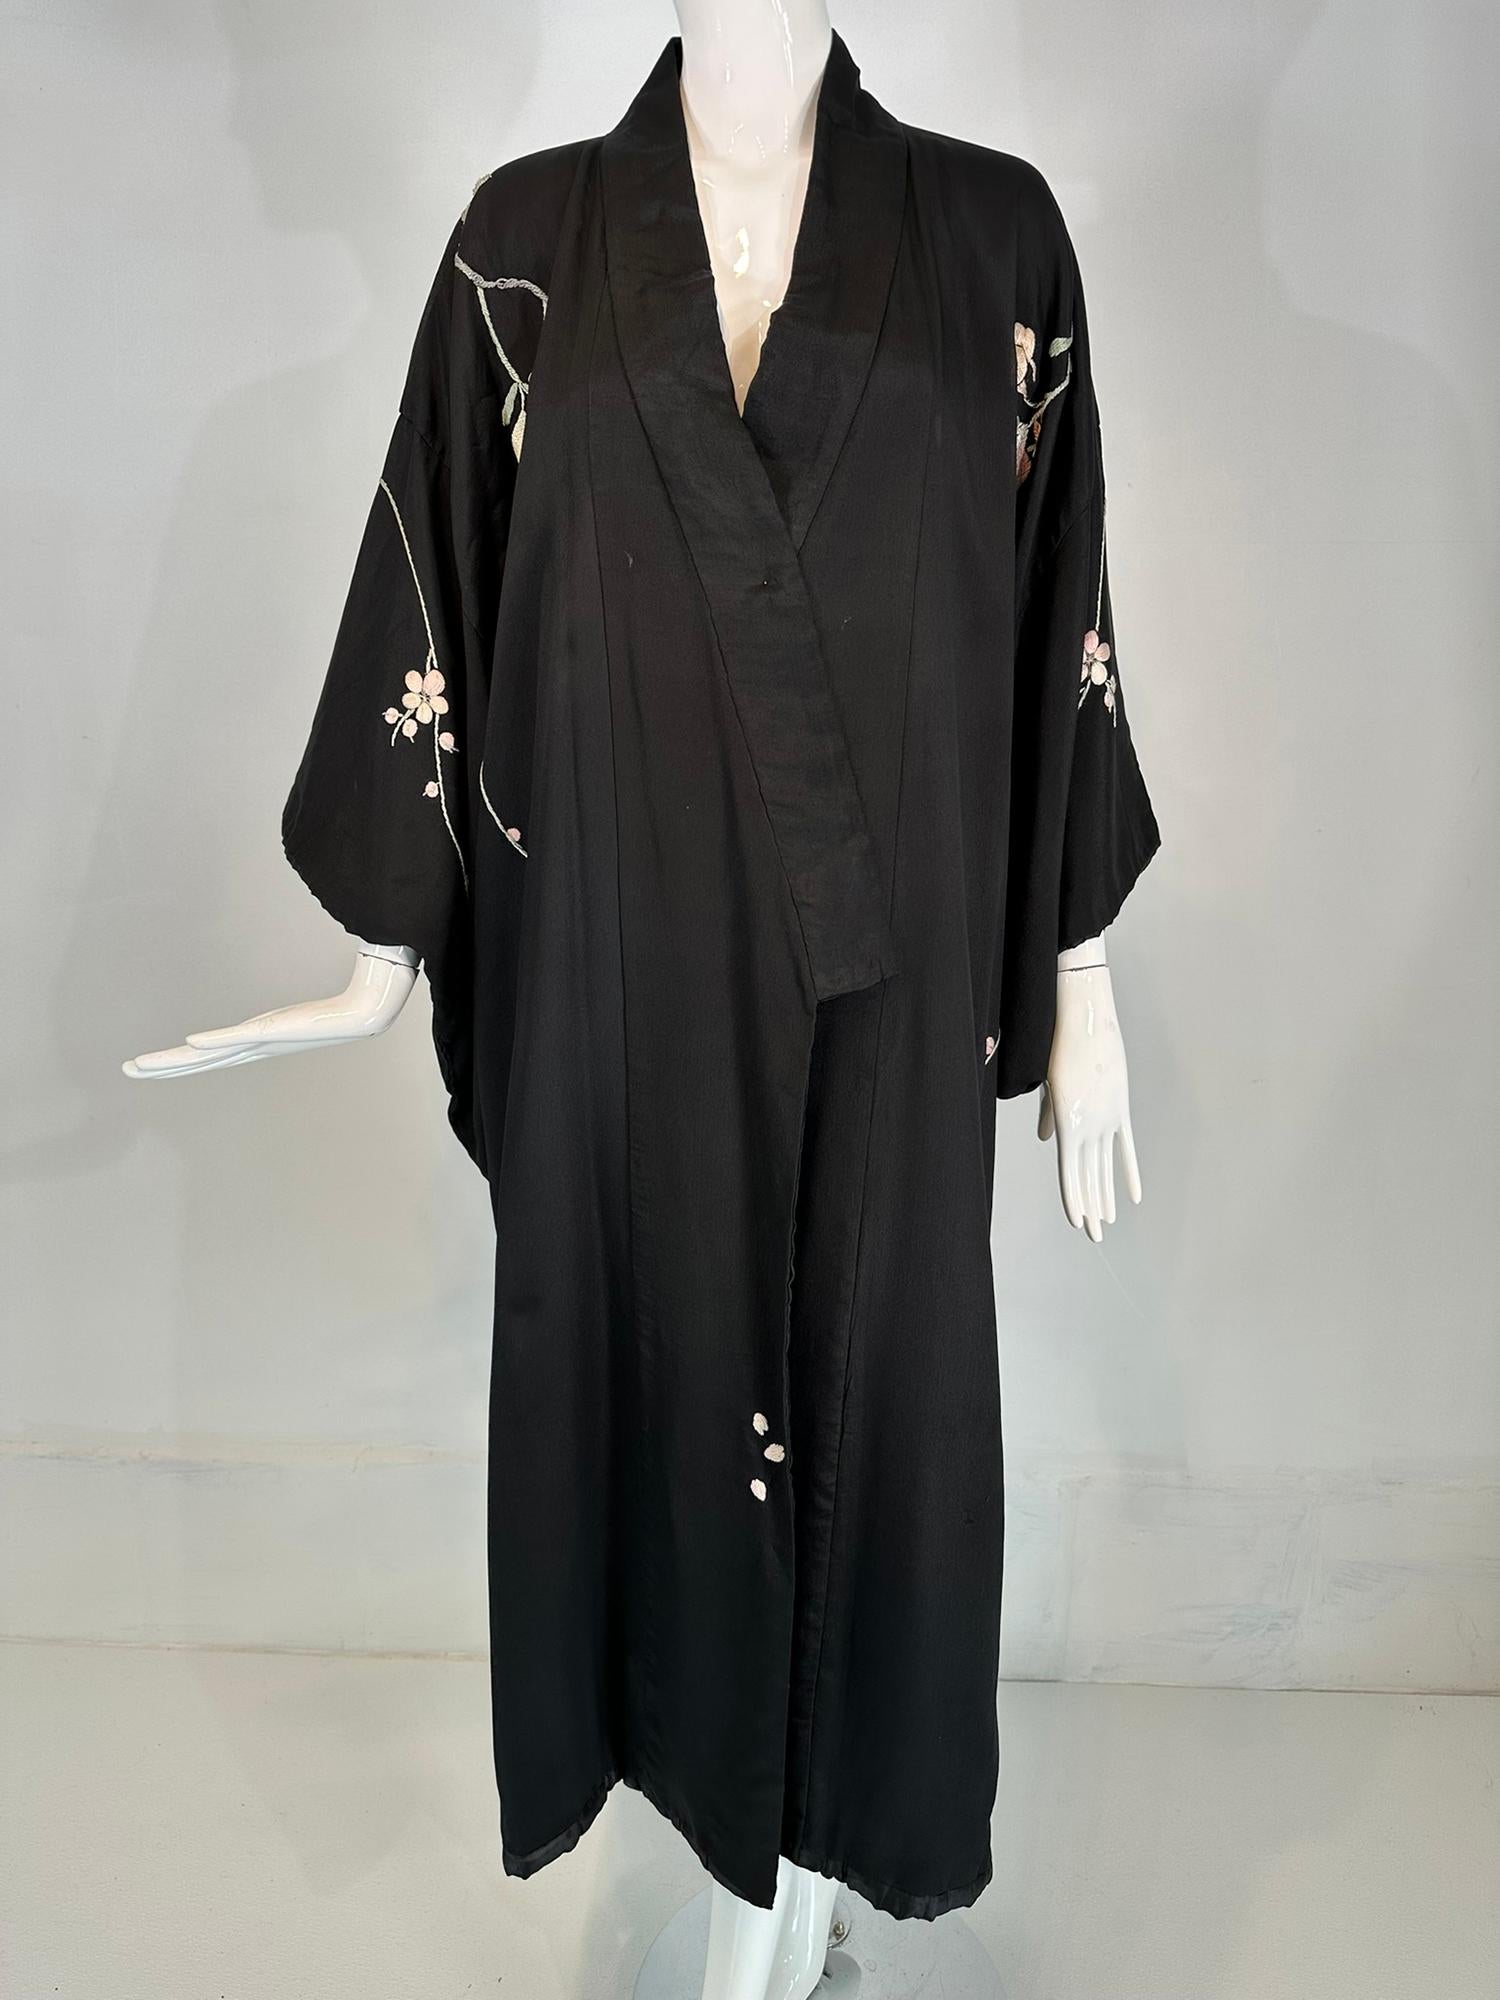 Vintage black rayon pastel floral embroidered kimono robe from the 1930s-40s. Wrap front robe lined in black tissue rayon, with kimono style sleeves that have rolled padded hems. The robe is long. Floral embroidered across front & sleeves. The back